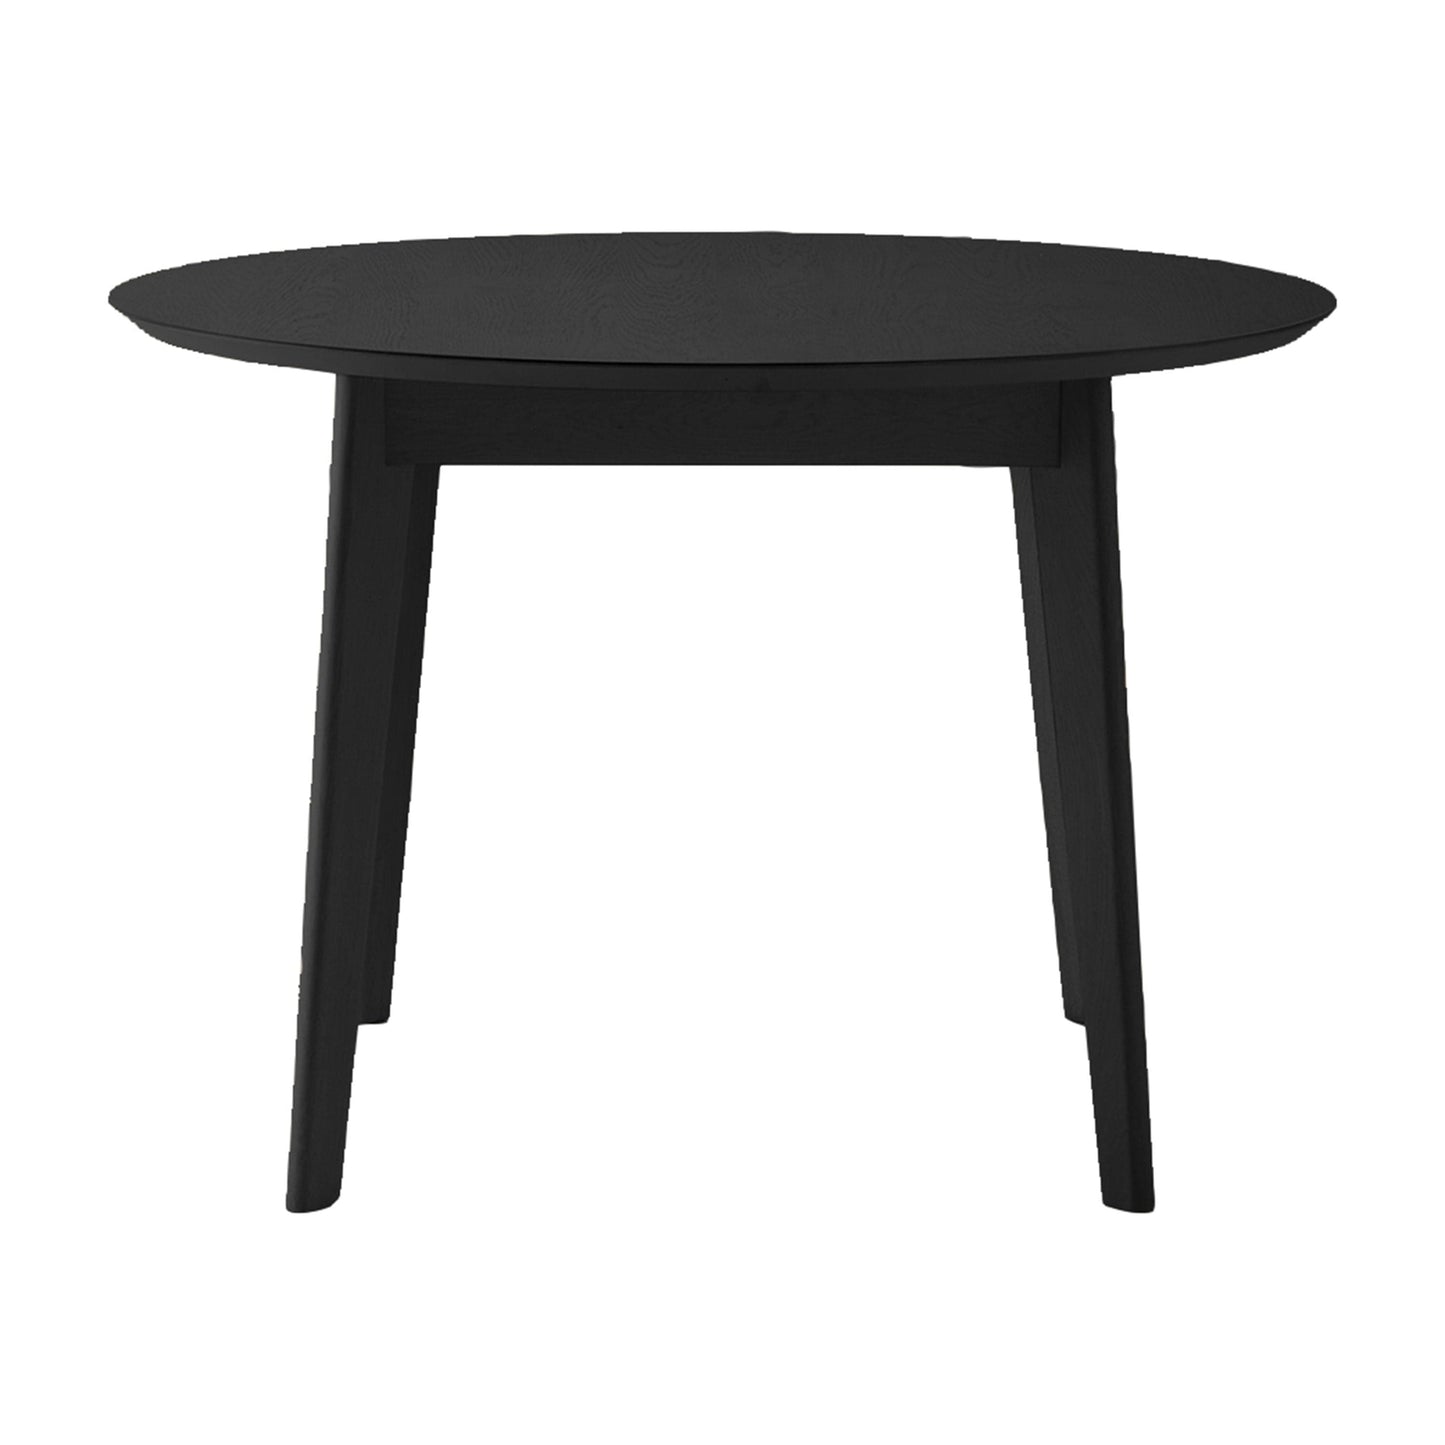 Forden Round Dining Table